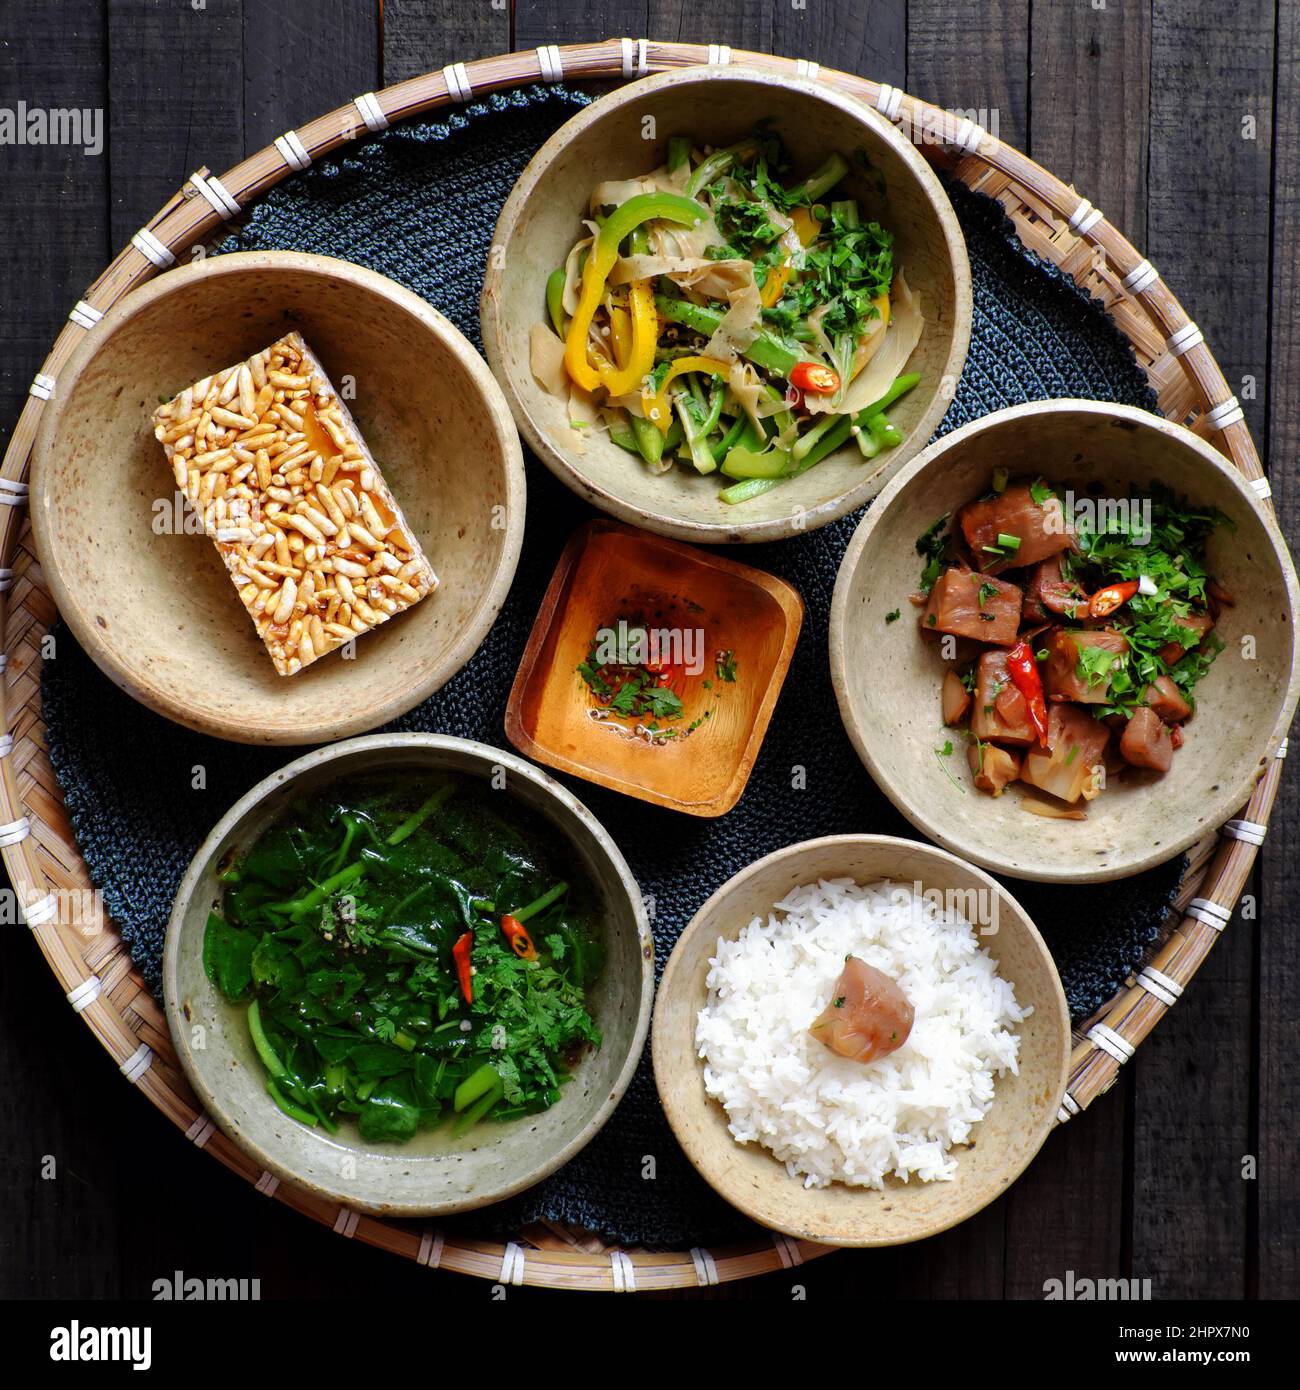 Top view tray of Vietnamese vegan food ready to eat, rice bowl, fried bell pepper, young jackfruit cook with sauce, vegetable spinach soup, non meat d Stock Photo